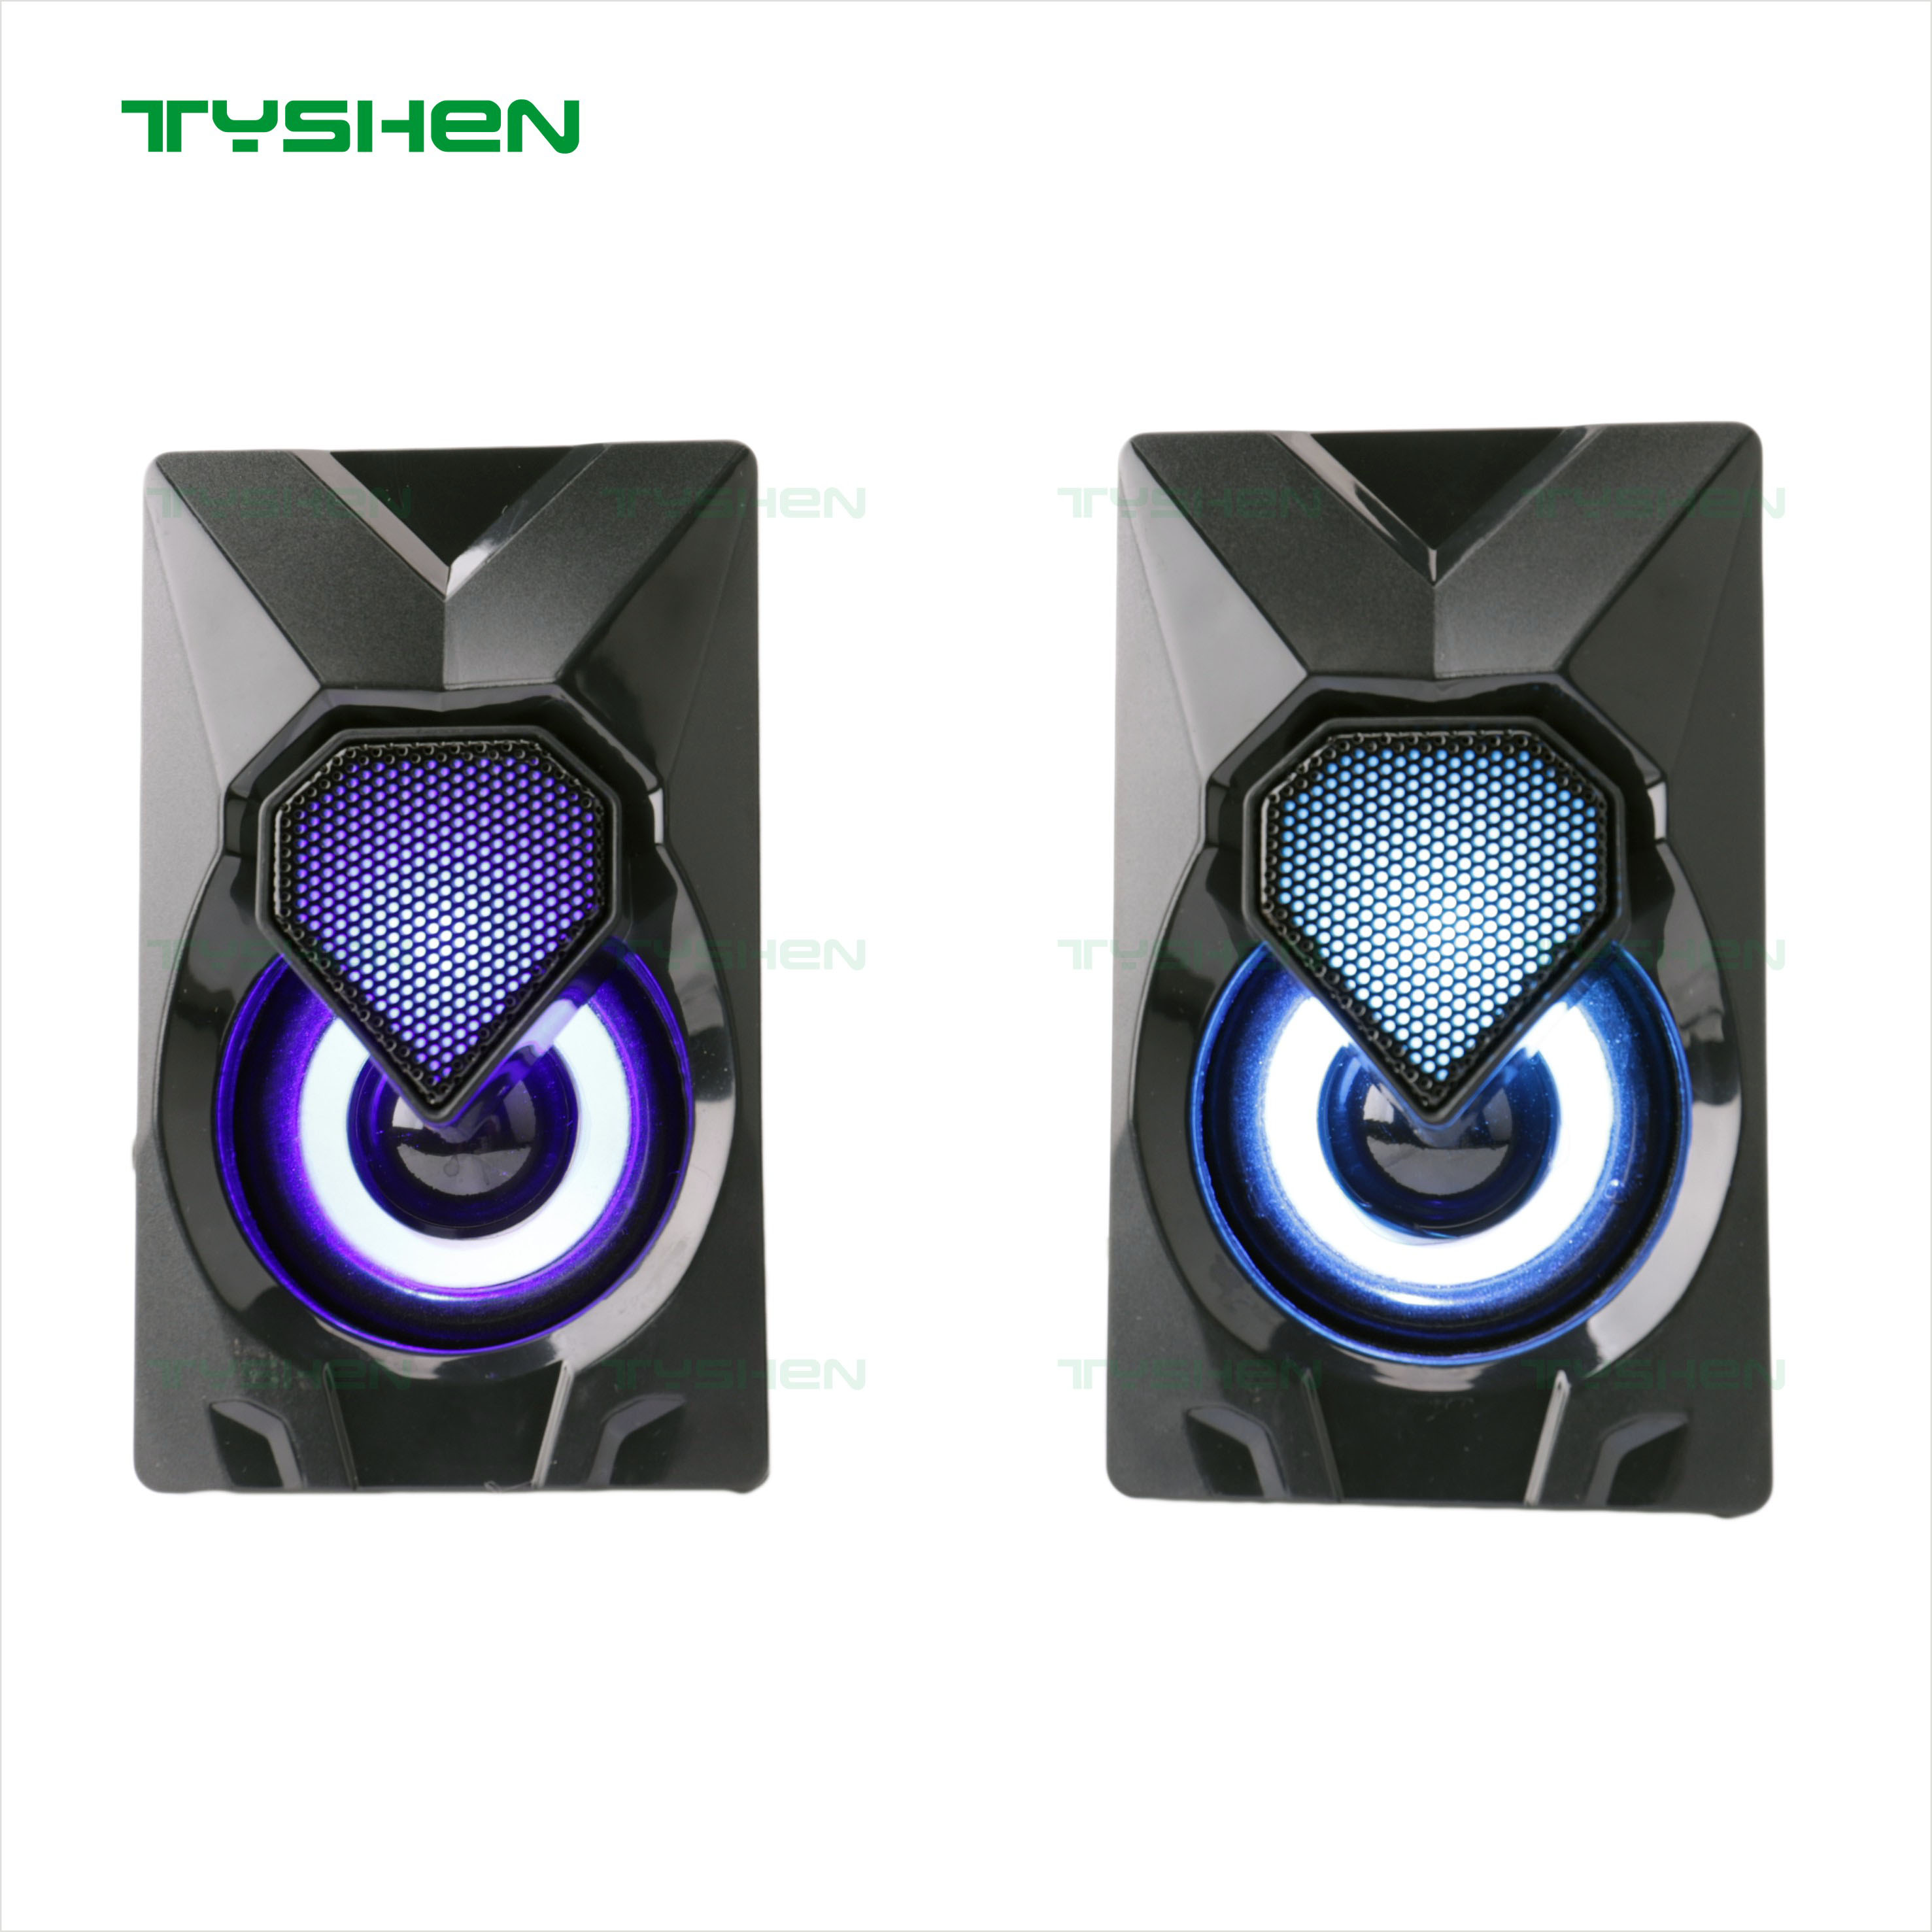 LED RGB Gaming Speaker, 2.0 Channel, Mini Size for Computer, 2021 New Model